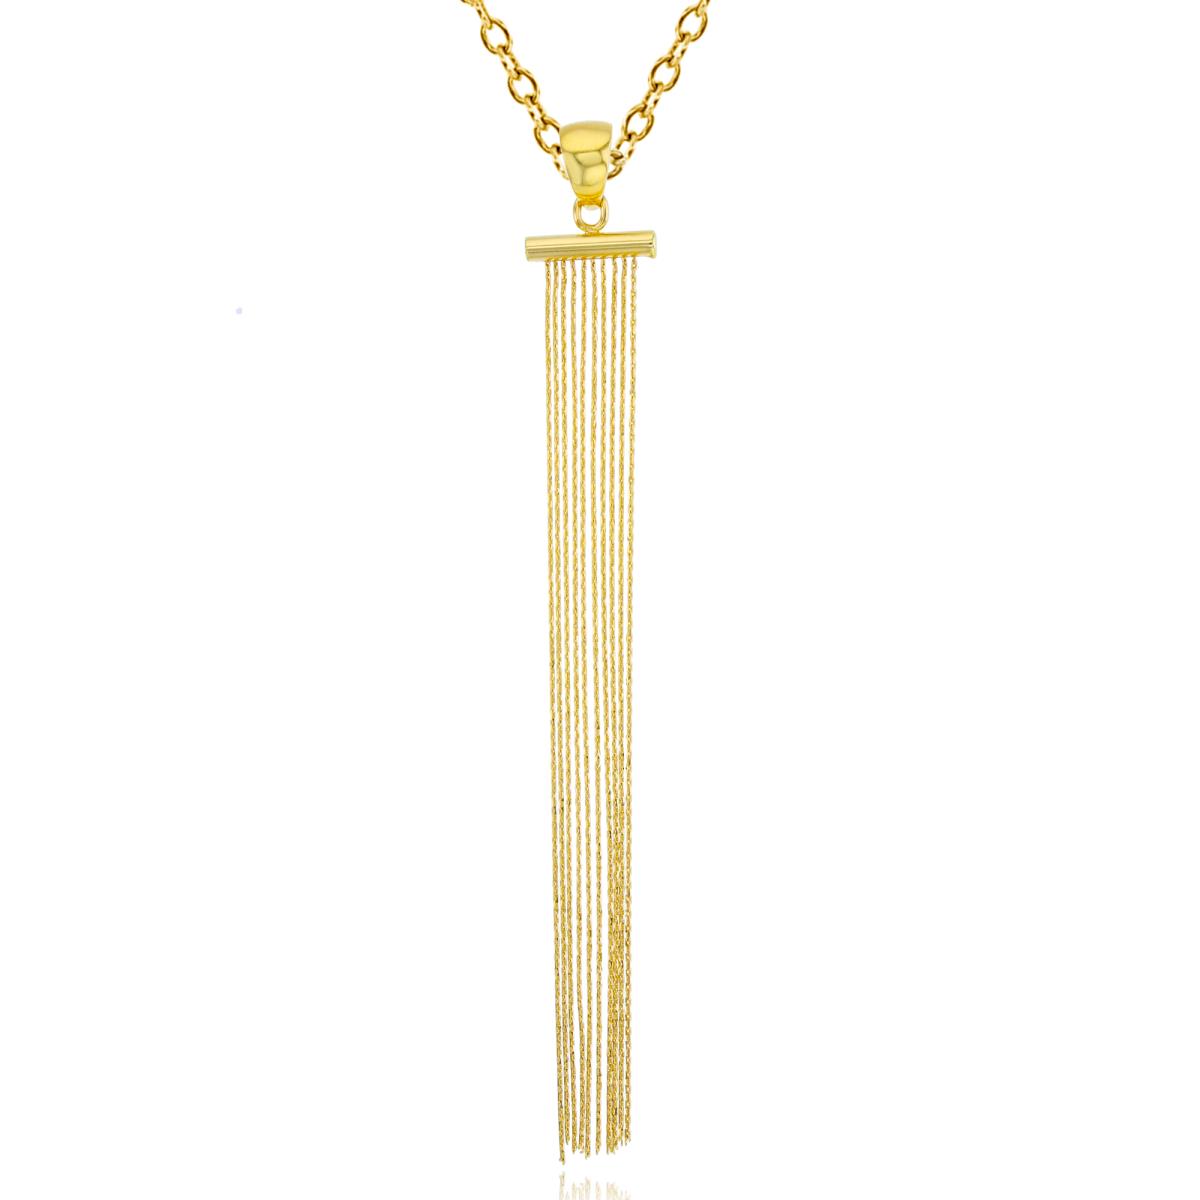 14K Yellow Gold Straight Tassle Dangling 18" Necklace